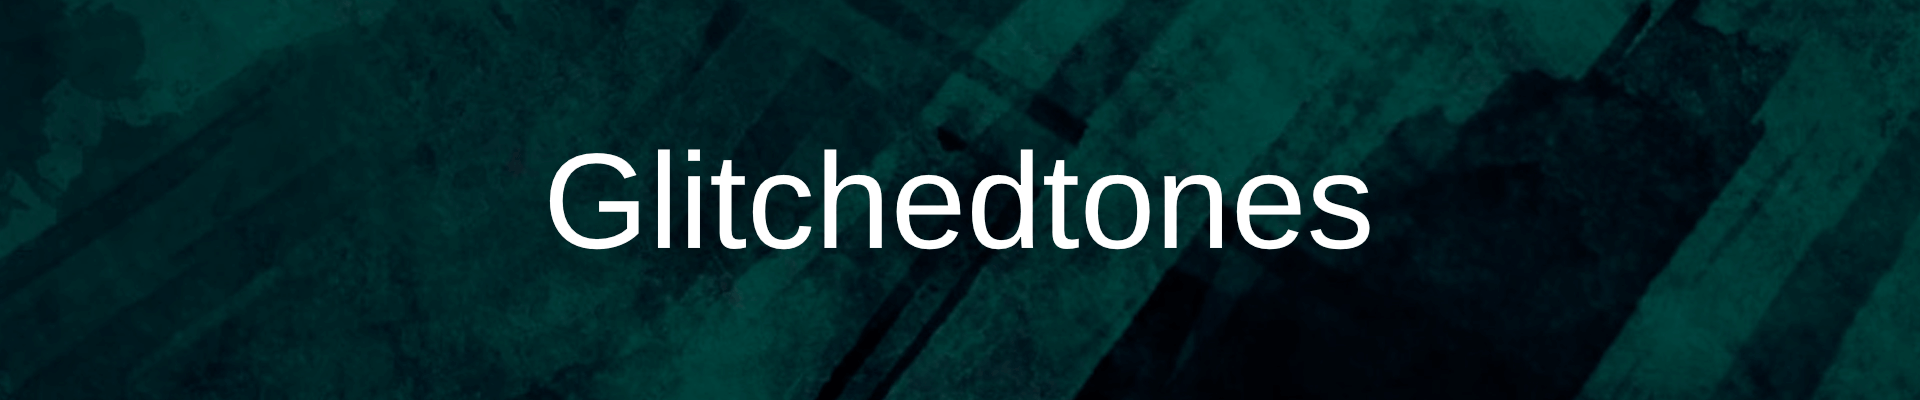 Glitchedtones Banner